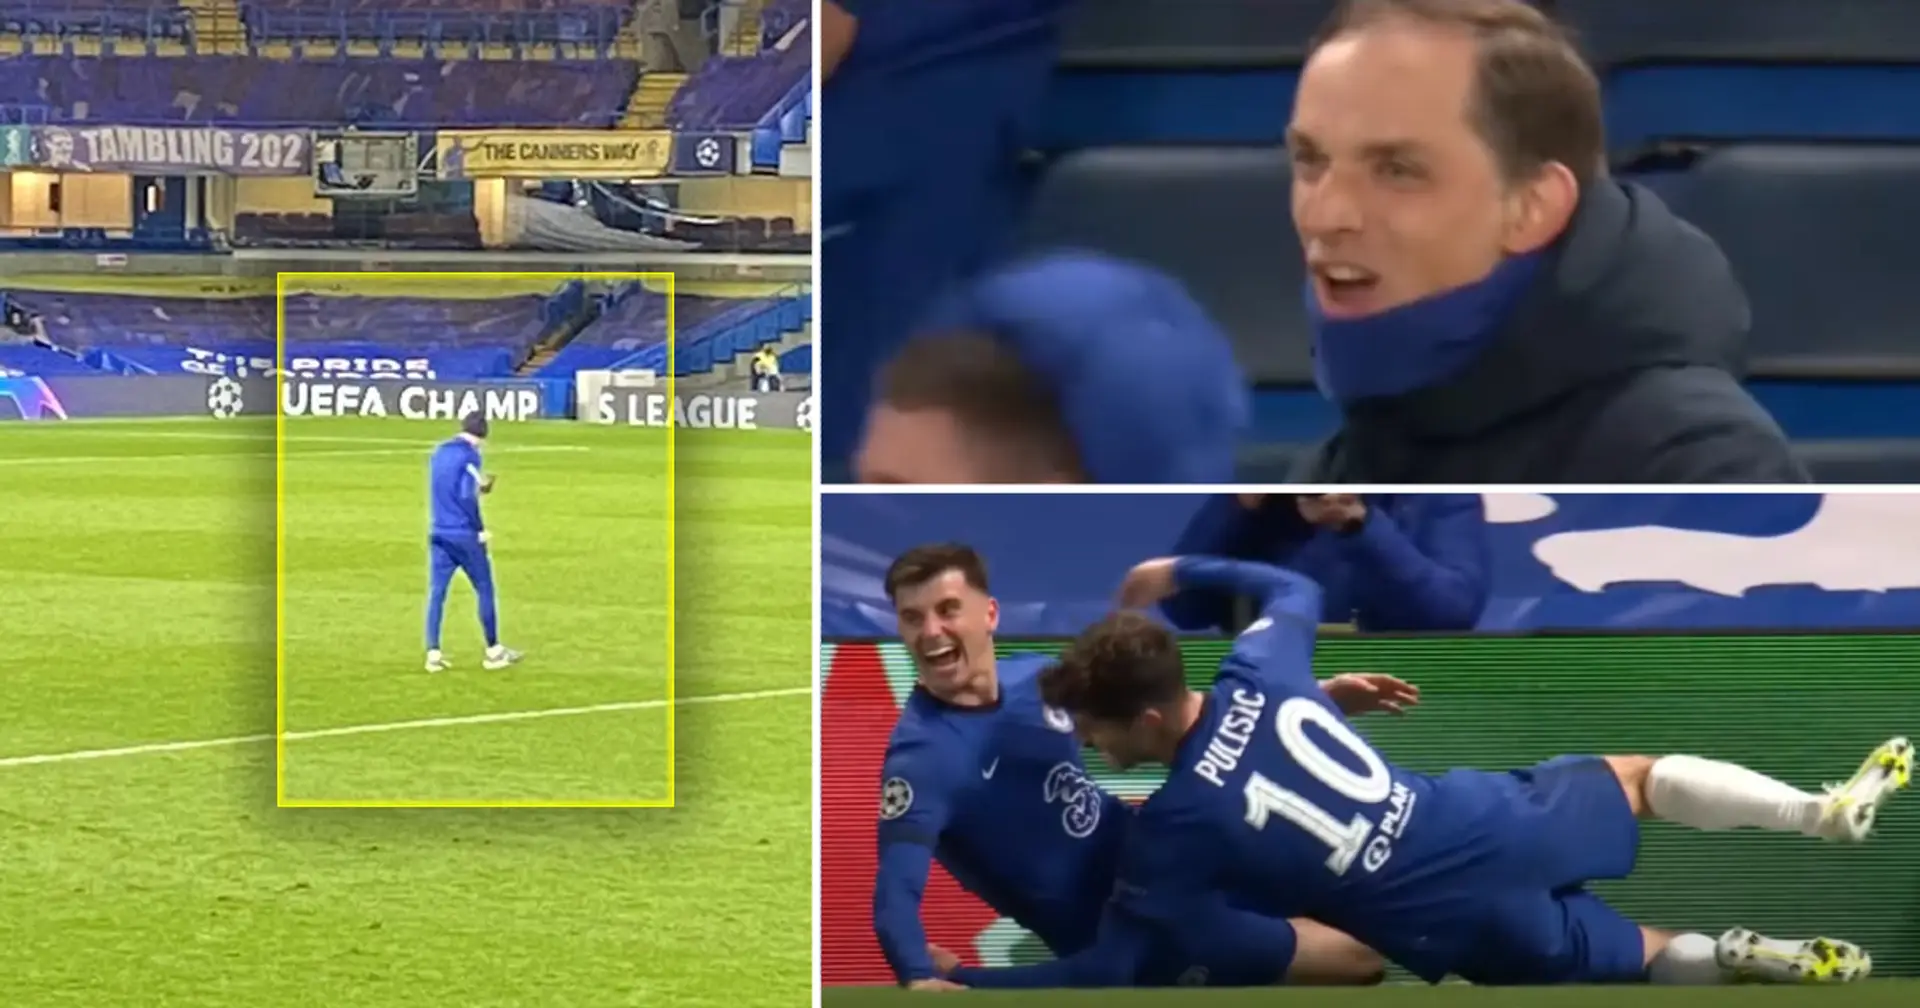 Tuchel let out 'massive roar of joy' on empty Stamford Bridge pitch after Chelsea destroyed Real Madrid